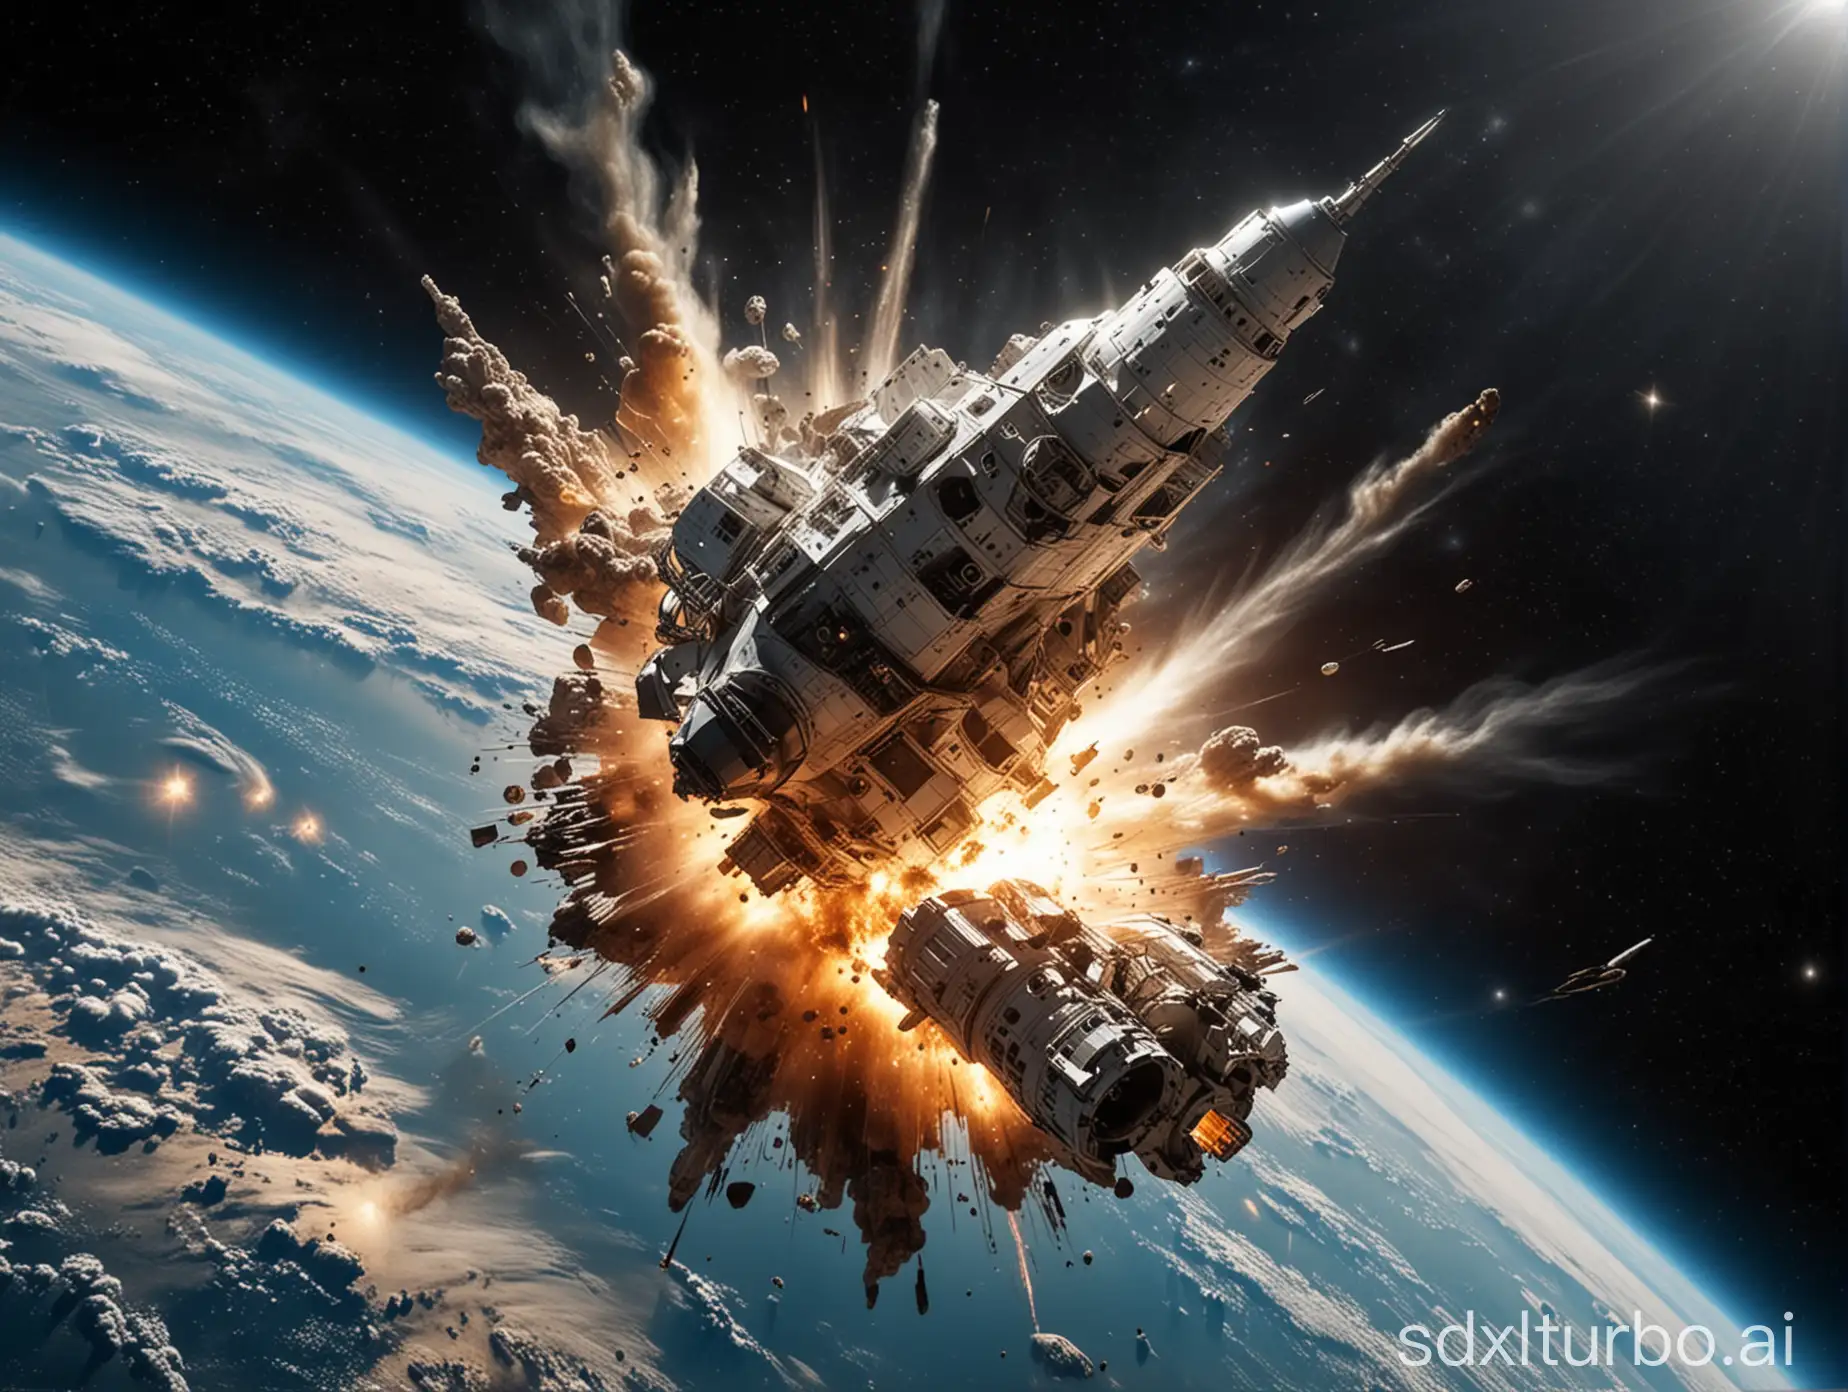 The War of God spacecraft was blown up in outer space, and the debris fell into outer space